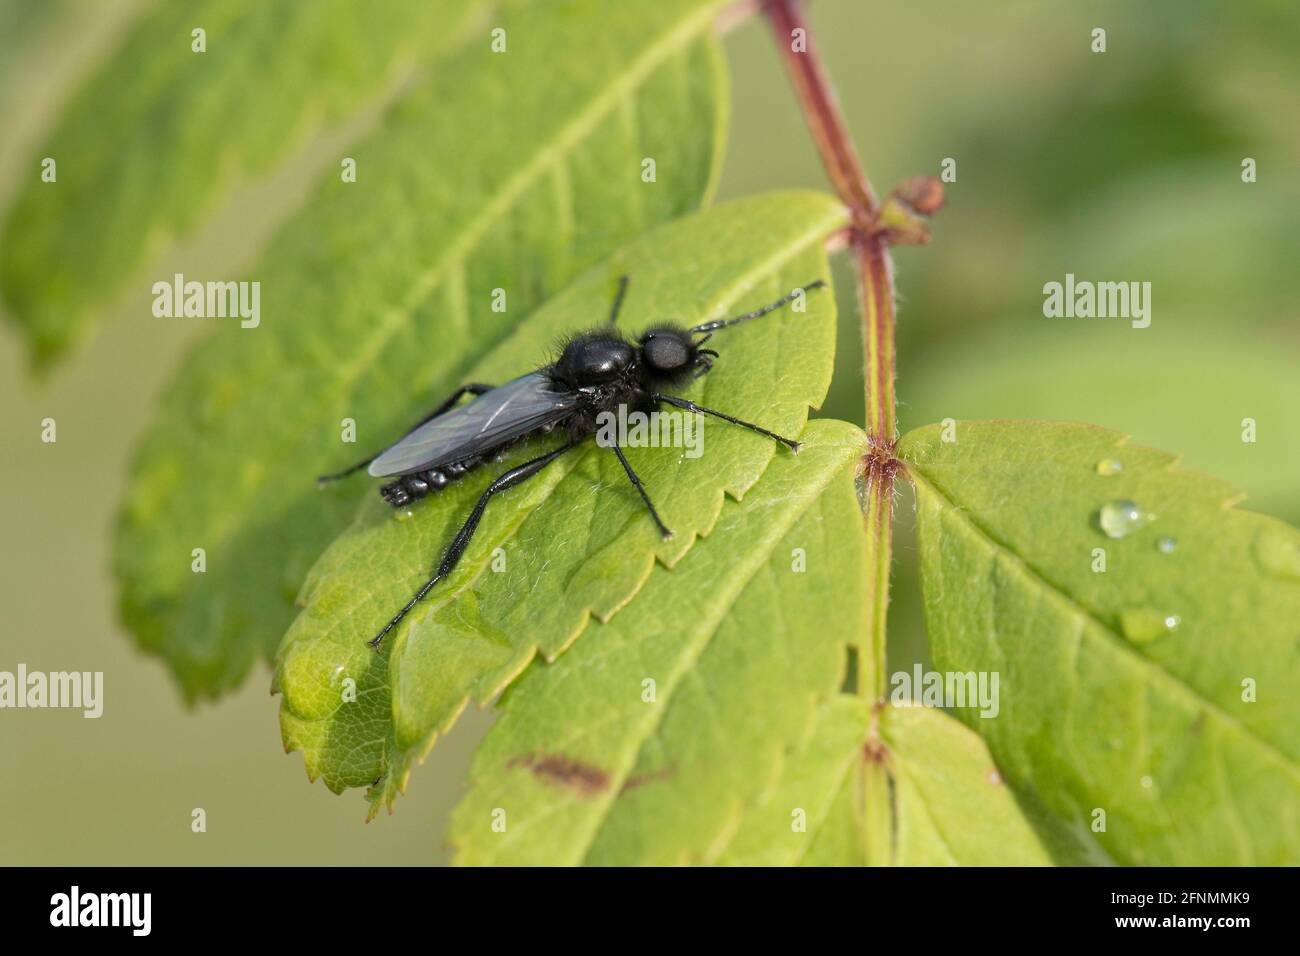 Adult St Mark's fly (Bibio marci) on leaves, appearing around St Marks Day, they are common long-legged slow-flying insects, Berkshire, May Stock Photo